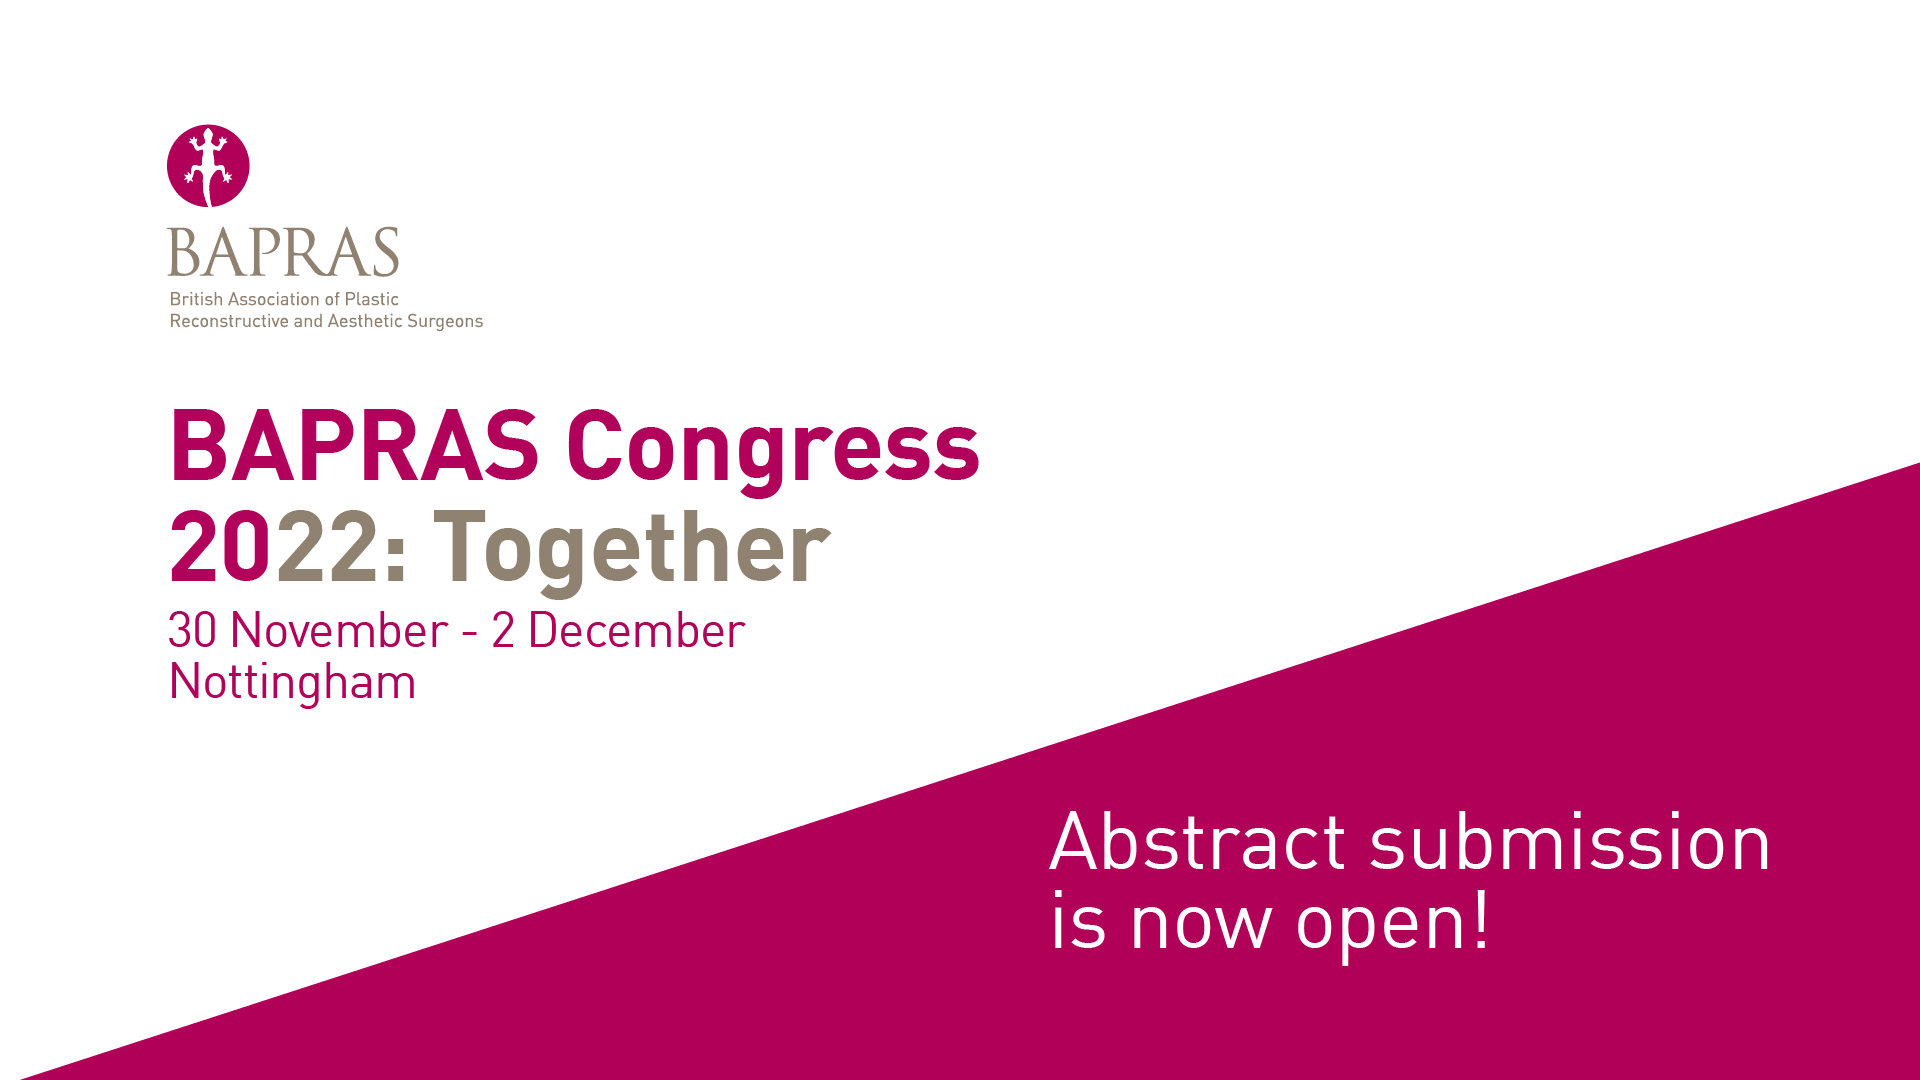 Abstract submission is now open for BAPRAS Congress 2022